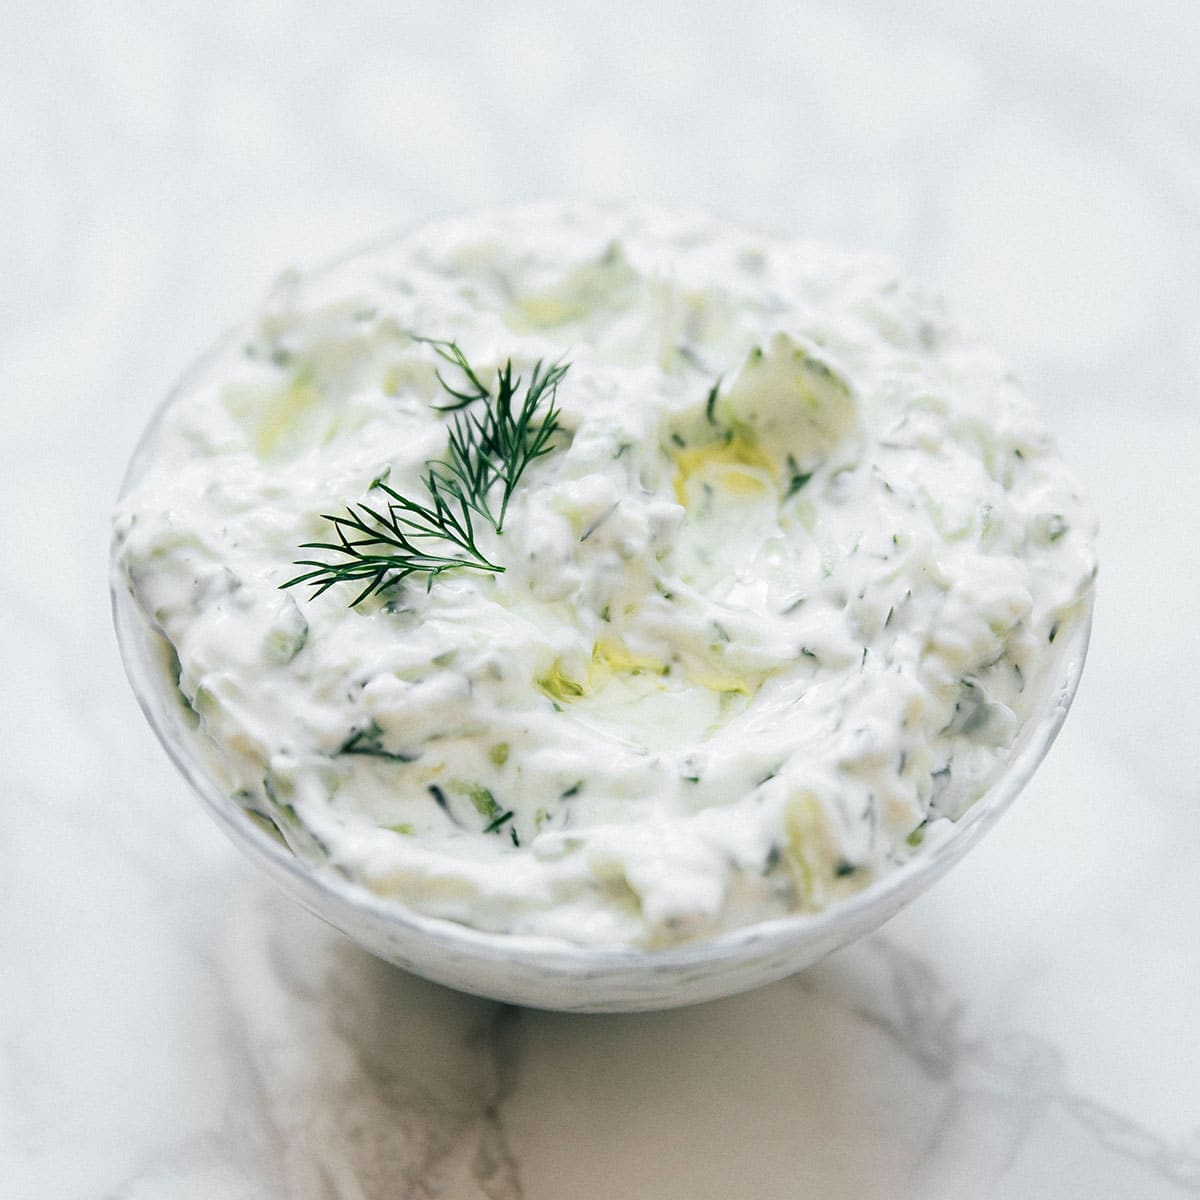 Tzatziki in a glass bowl on marble background.